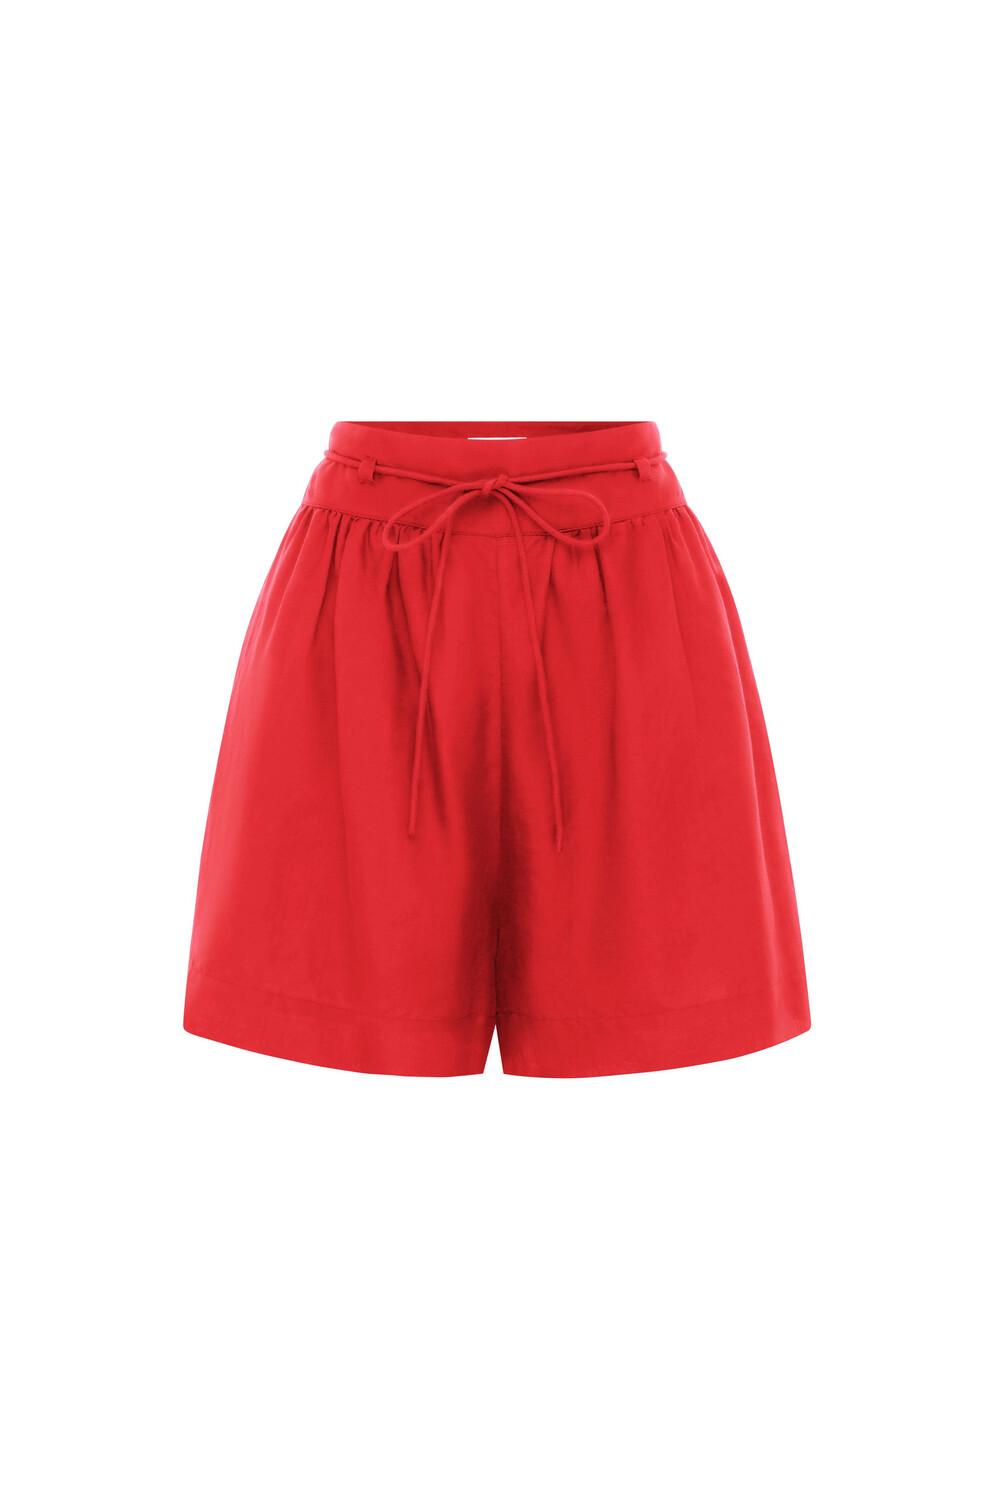 Bird & Knoll Agnes Shorts in Candy Apple